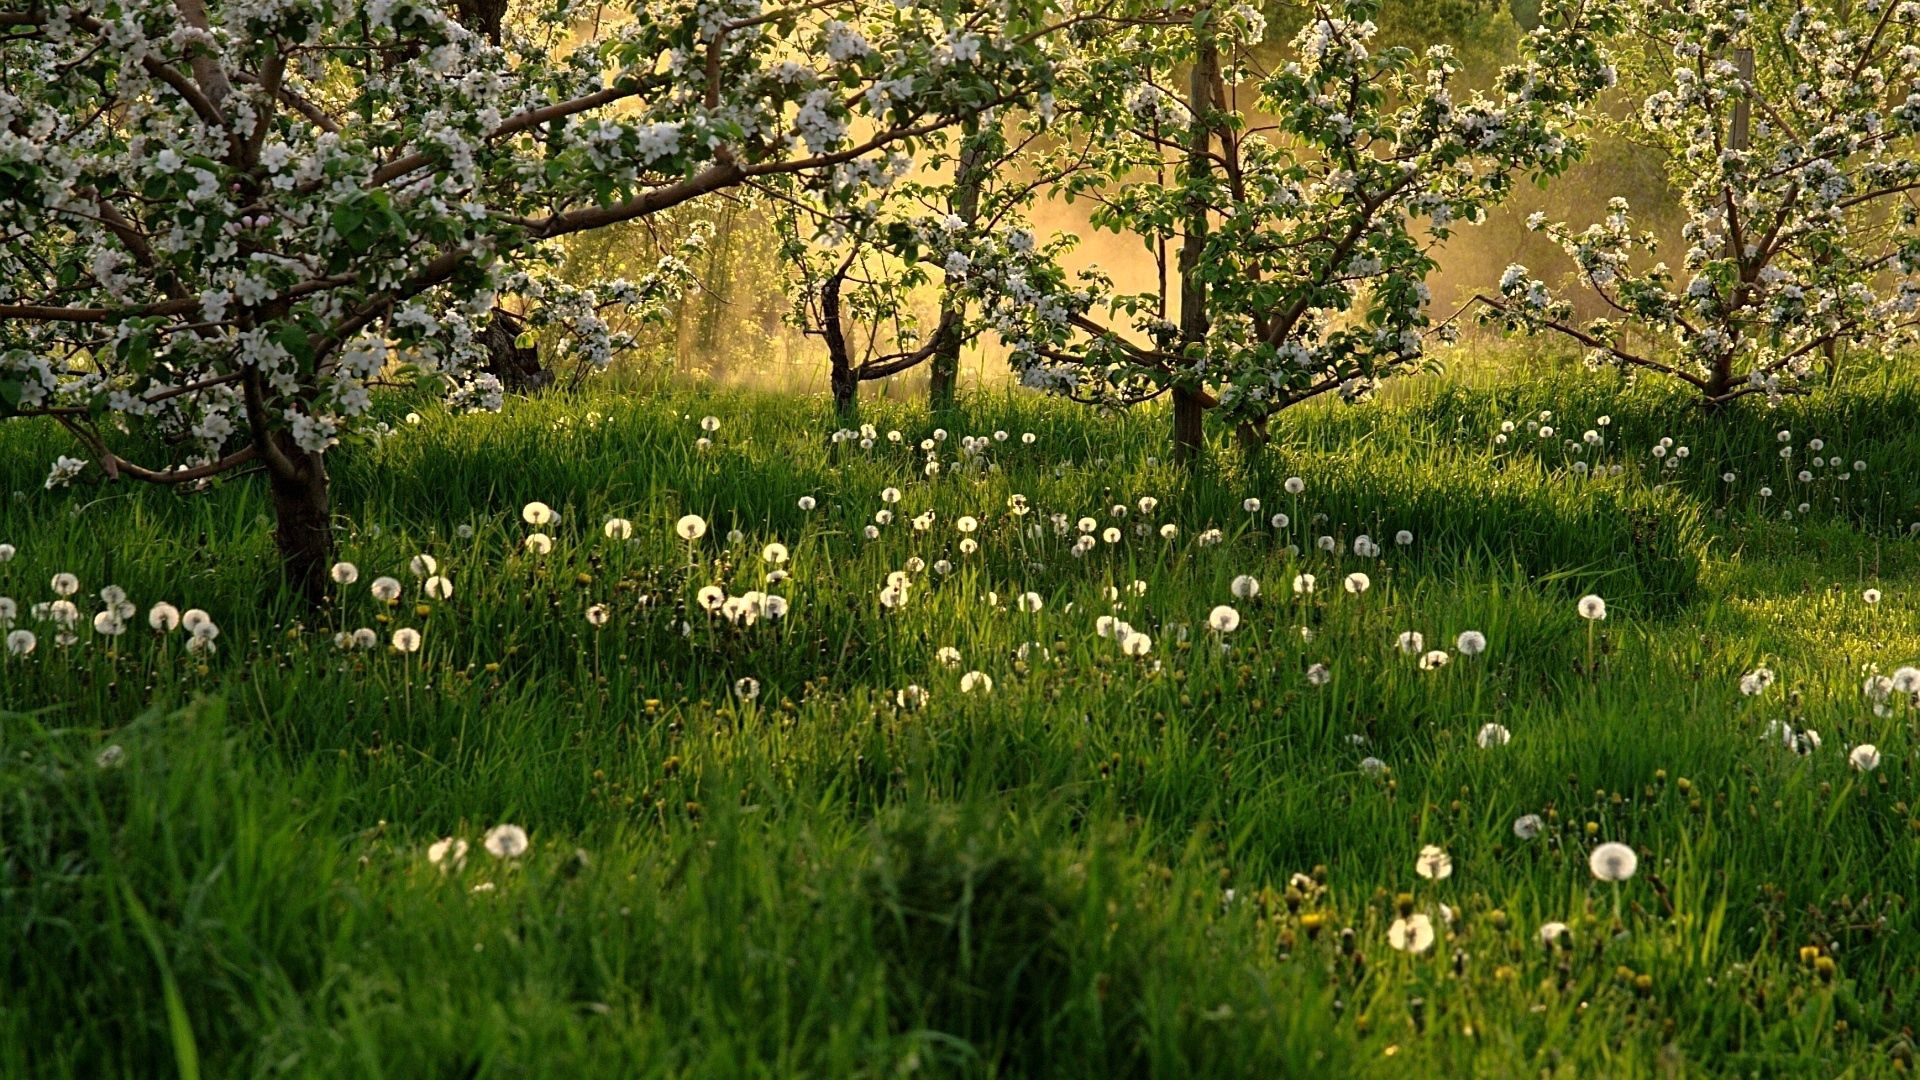 PC Wallpapers nature, trees, grass, dandelions, field